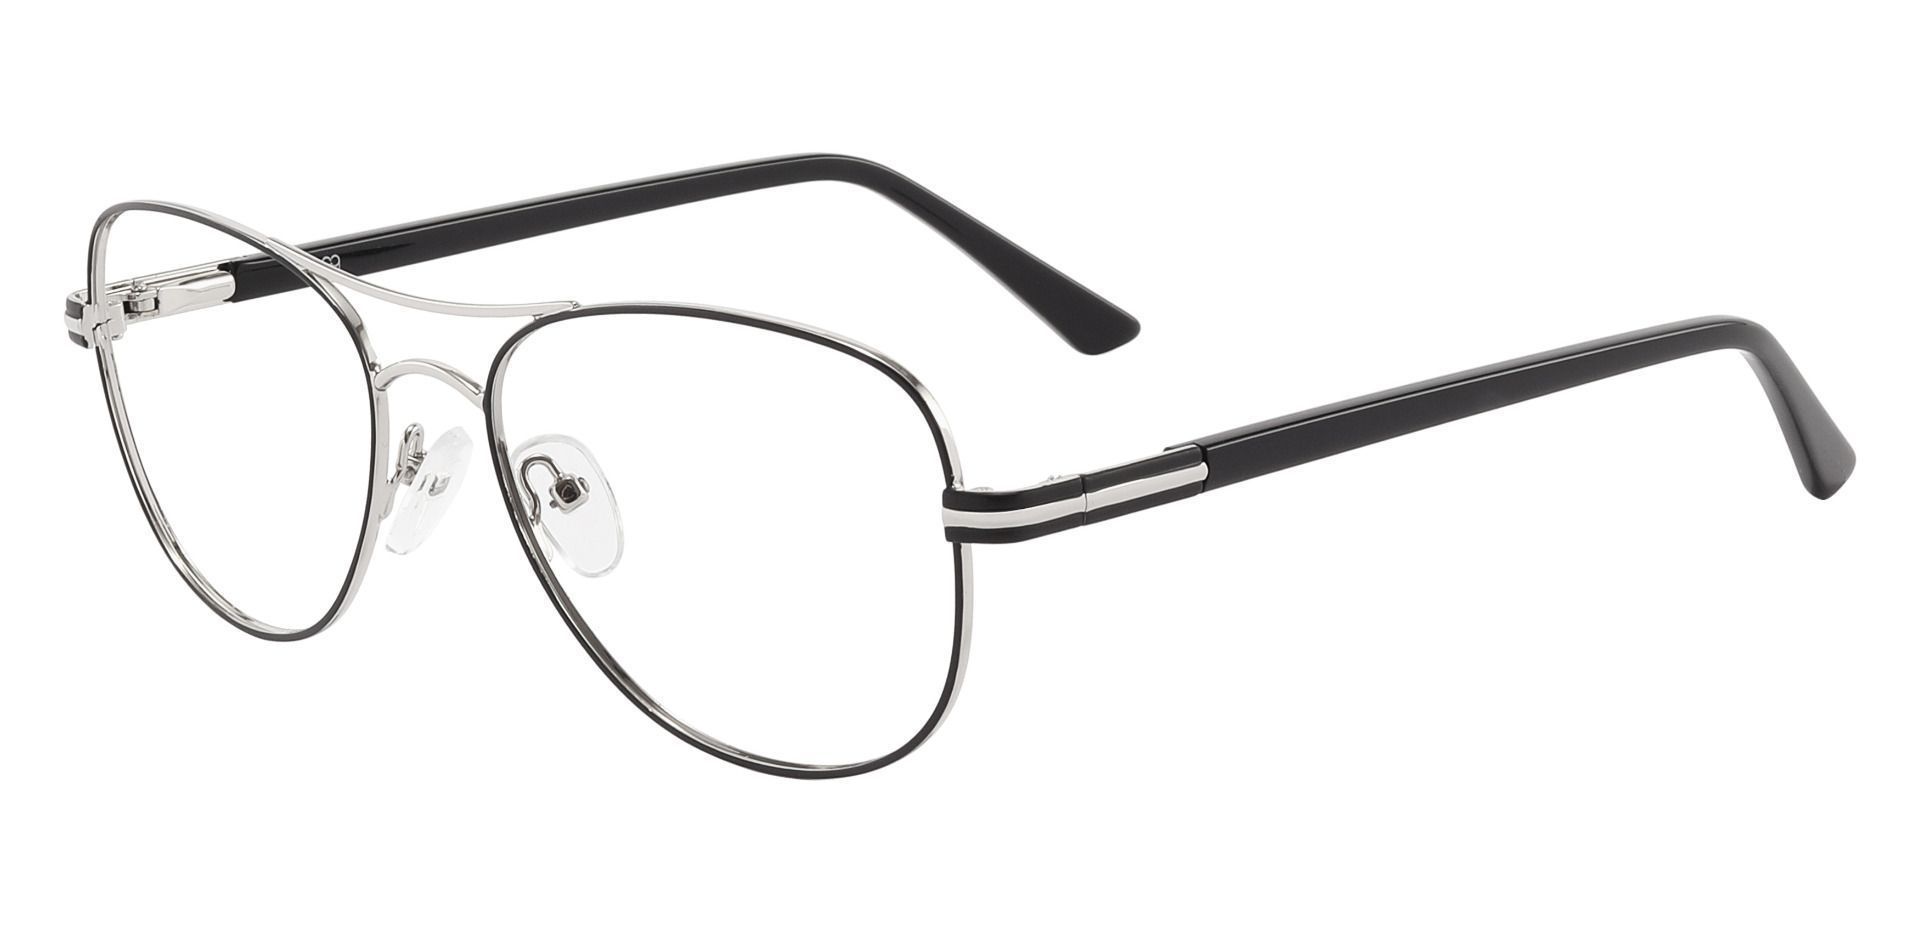 Reeves Aviator Reading Glasses - Silver